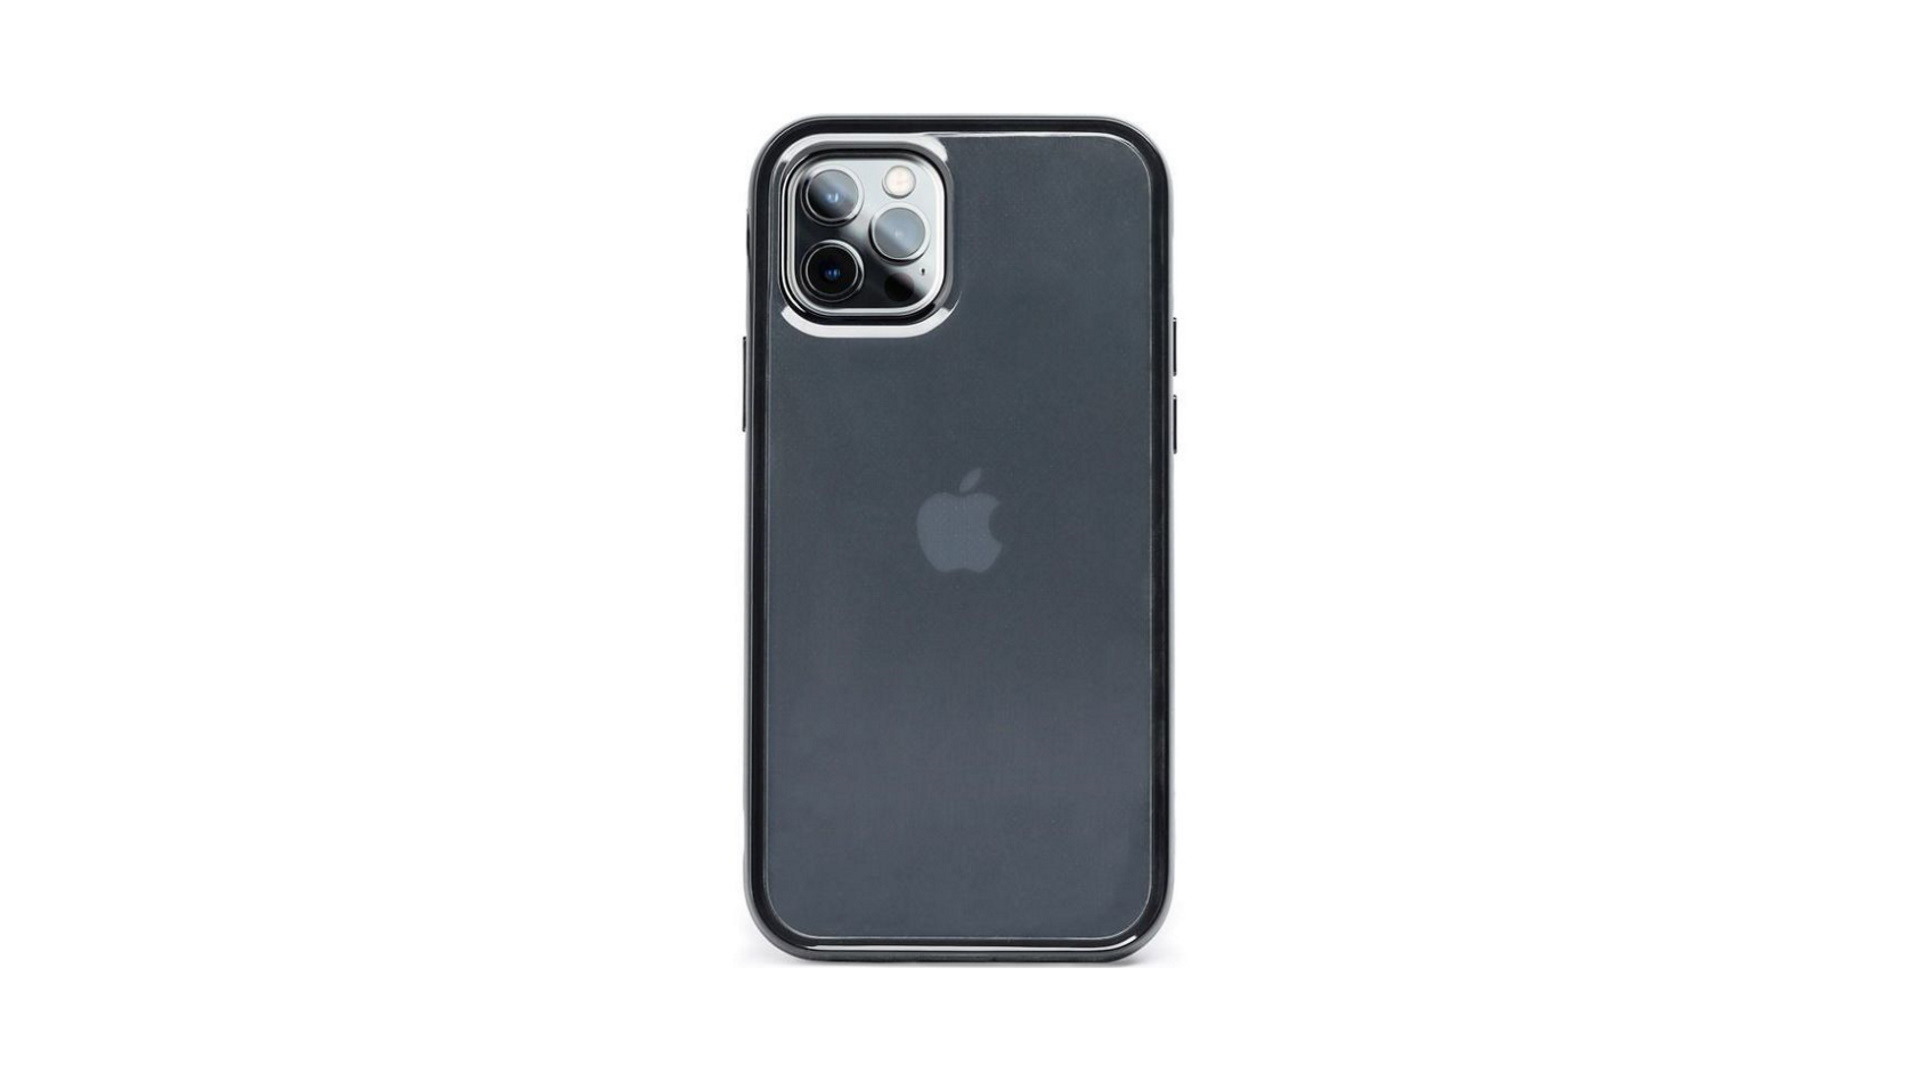 Mous Clarity iPhone 12 Pro Max case